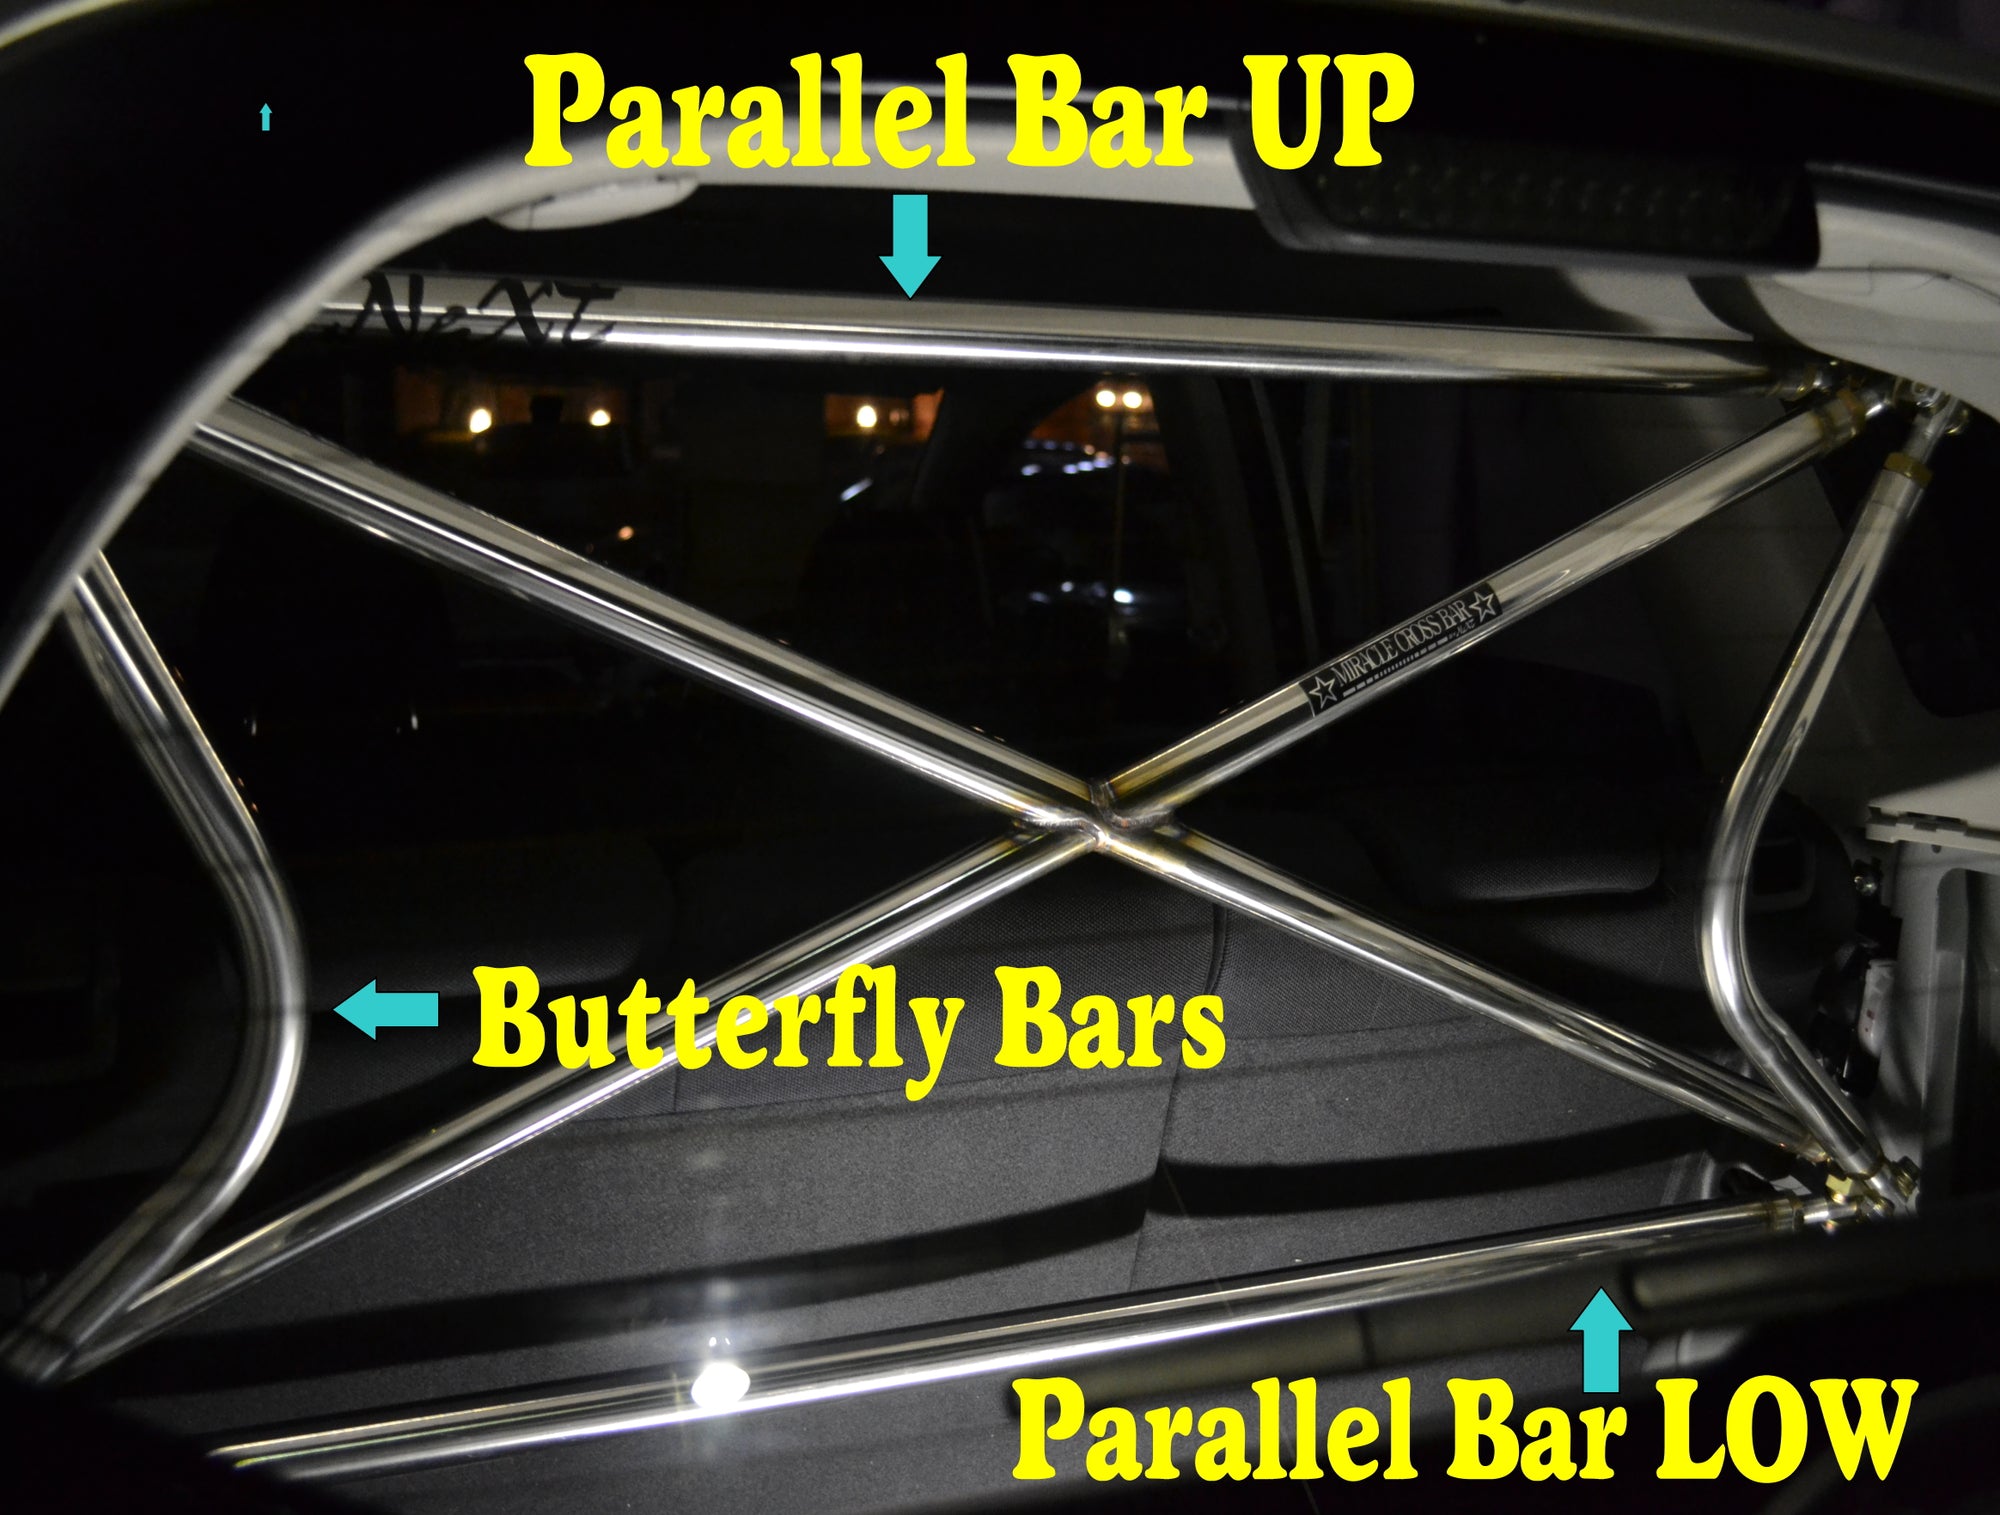 NEXT MIRACLE CROSS BAR PARALLEL BAR UP STAINLESS 35 FOR MITSUBISHI LANCER EVOLUTION 4 5 6 NEXT-01261